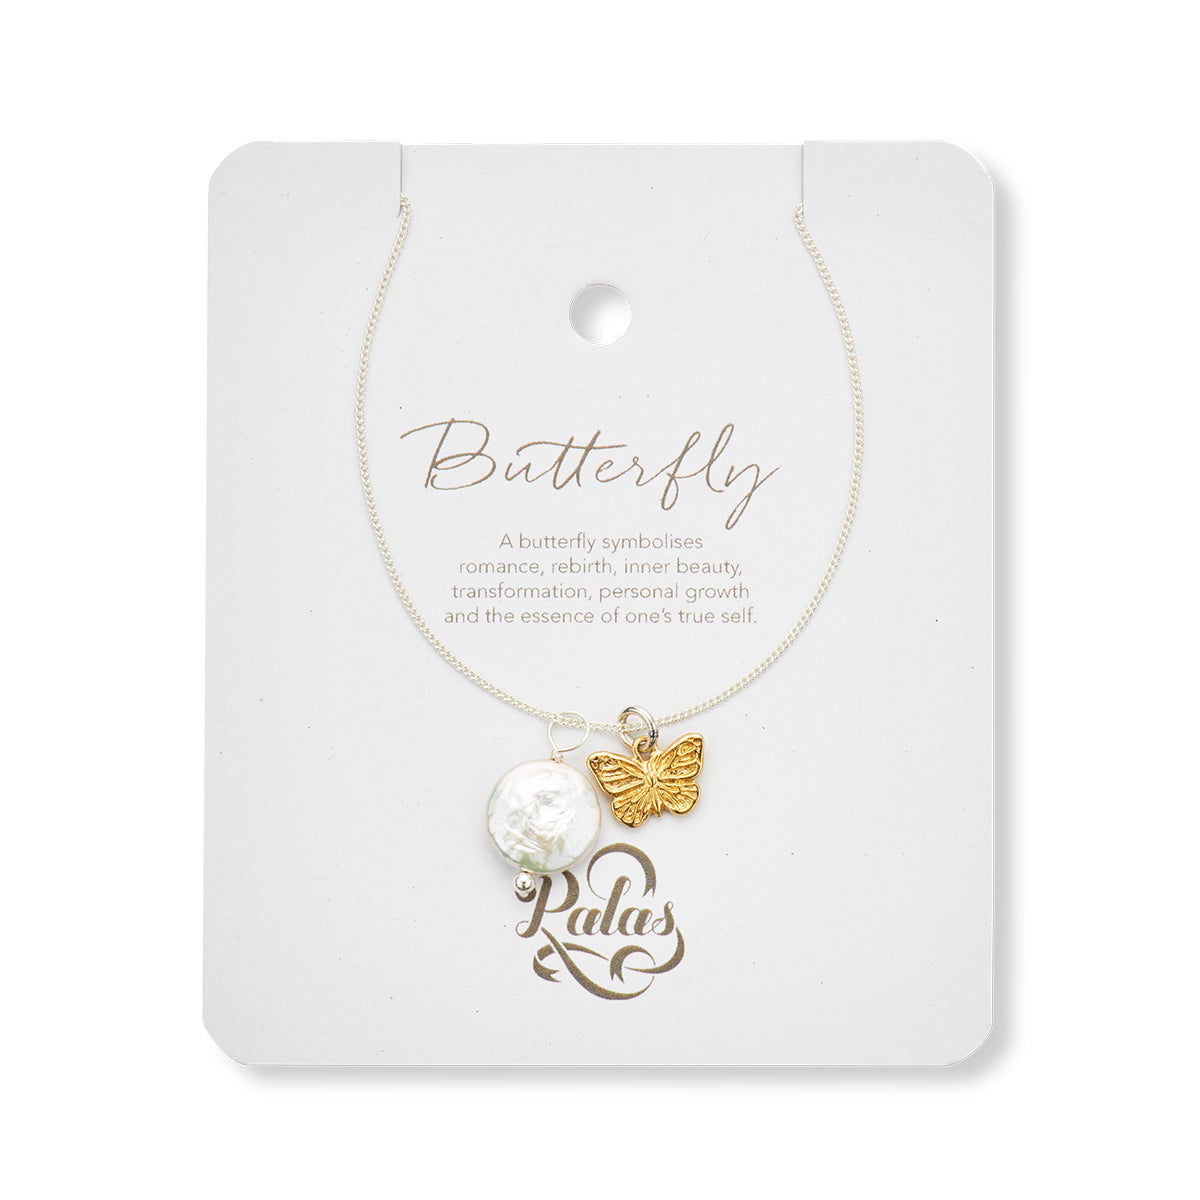 Butterfly and pearl amulet necklace